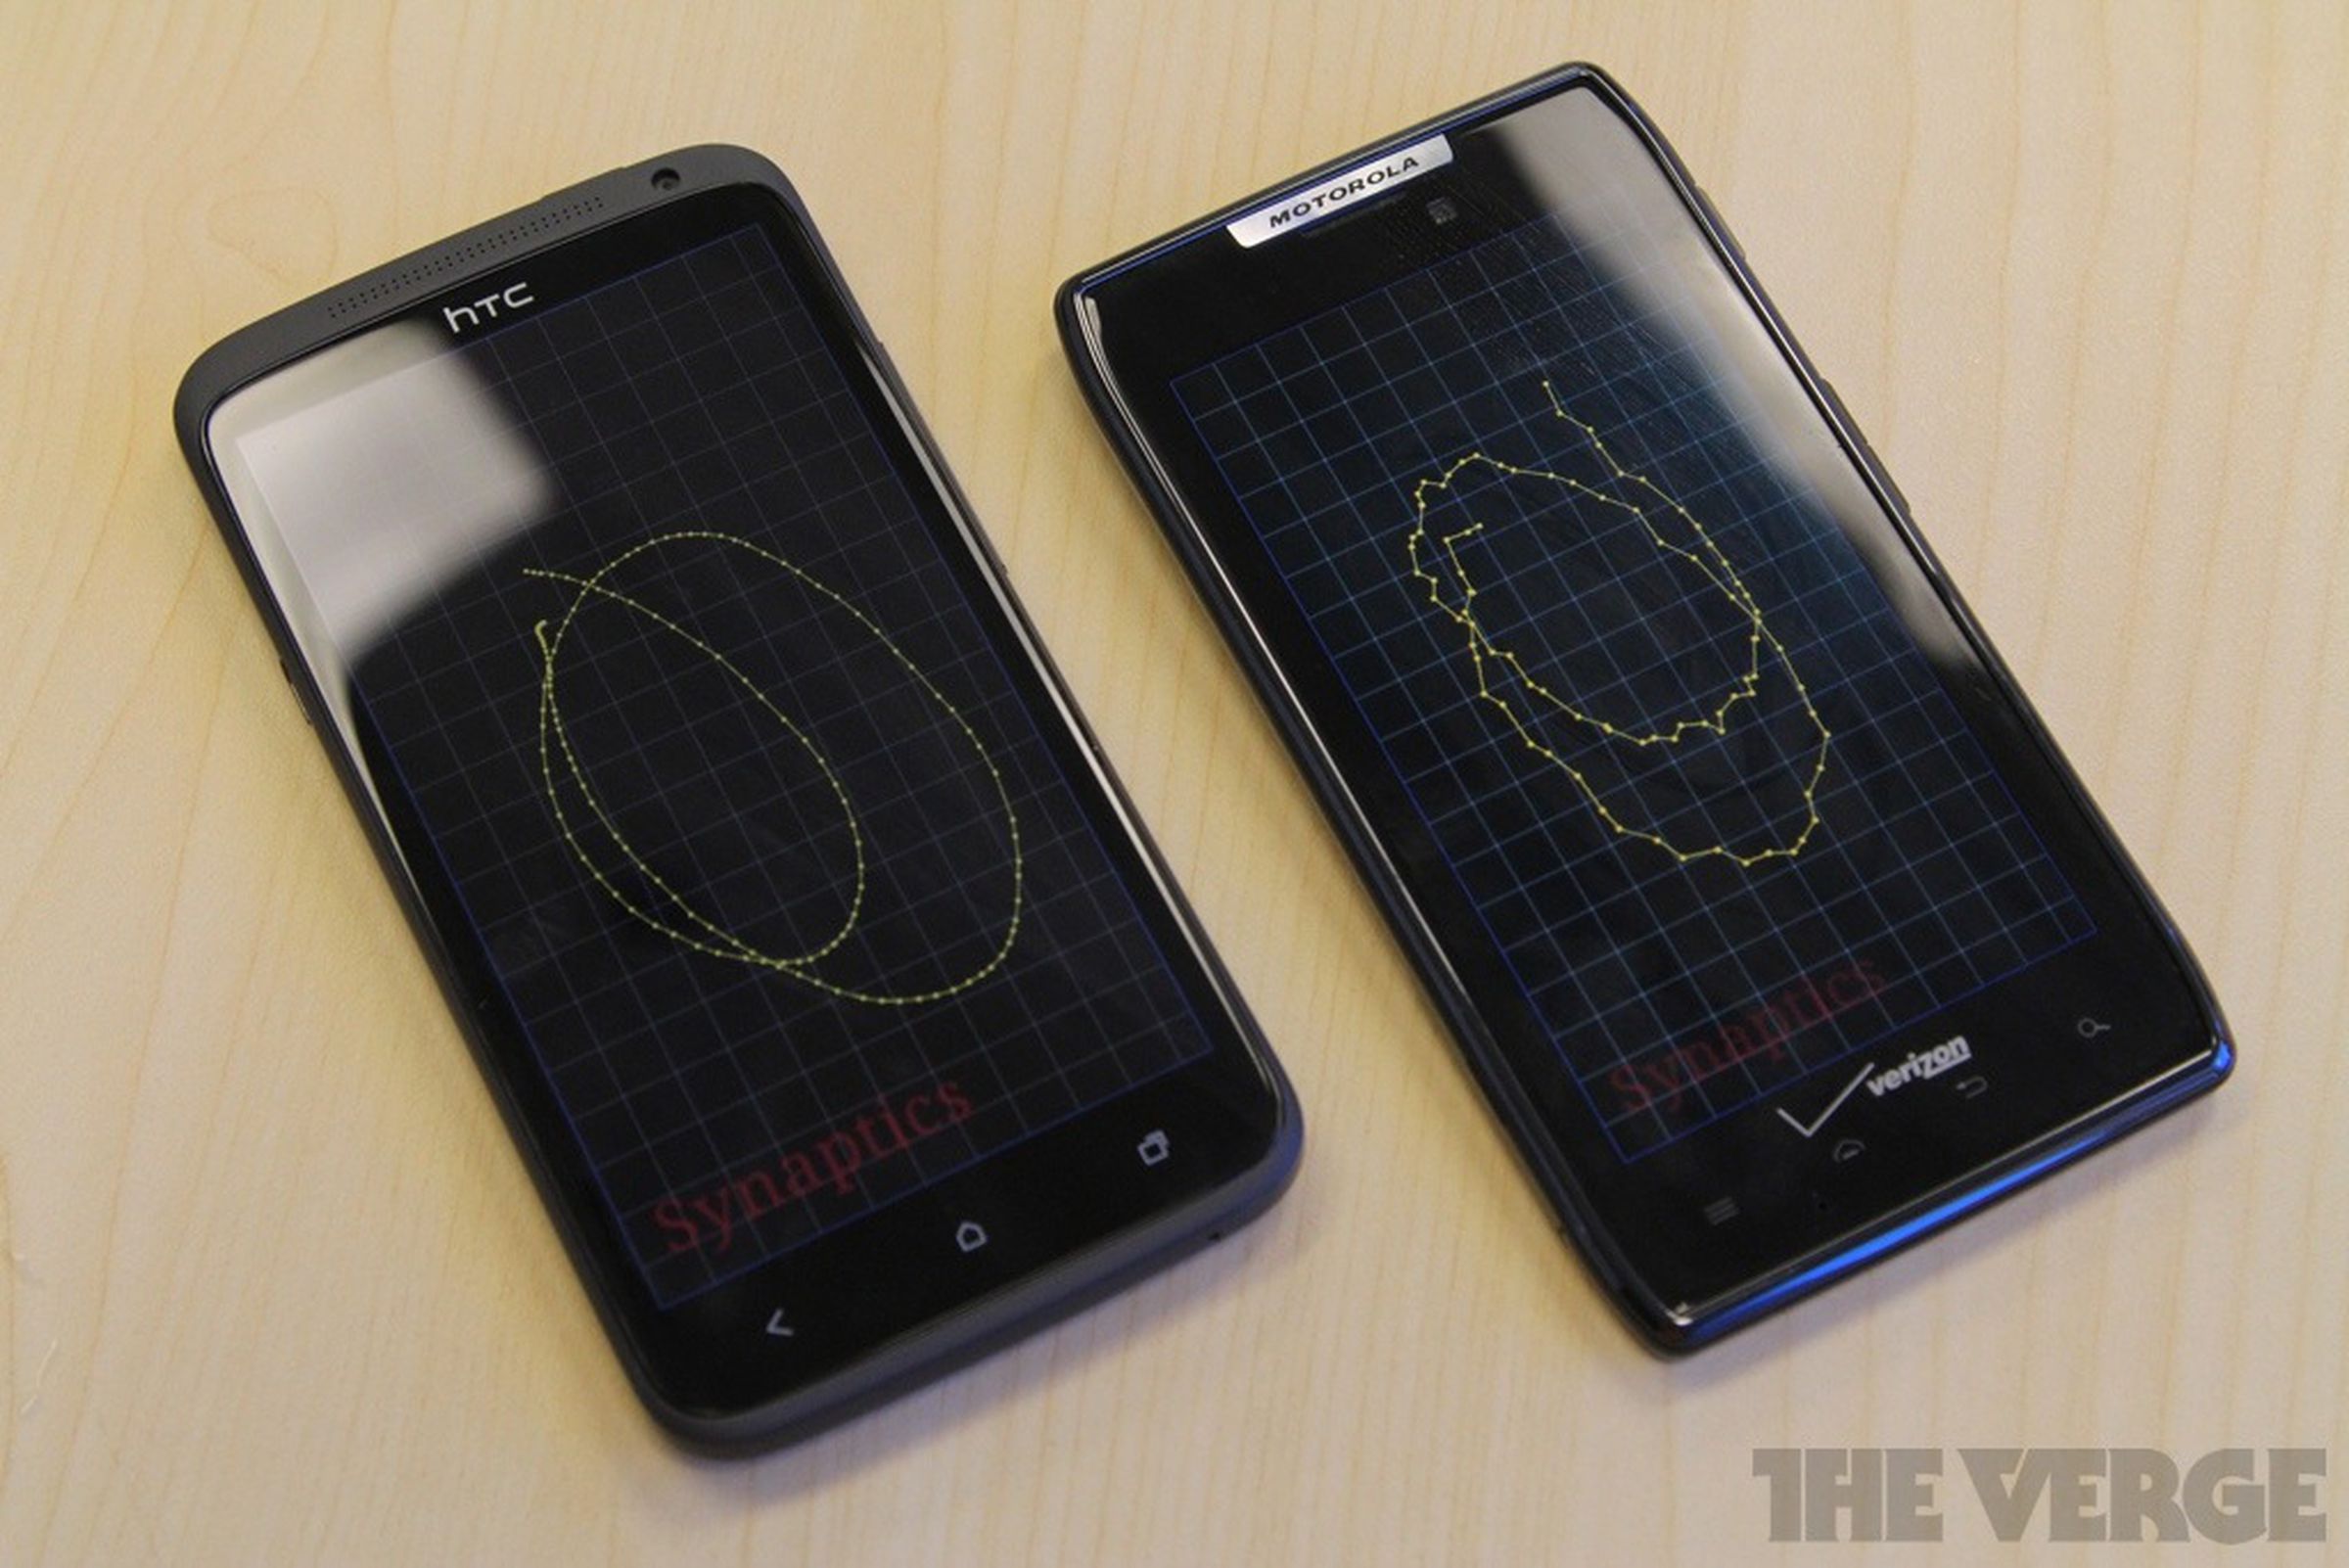 Synaptics ThinTouch hands-on pictures